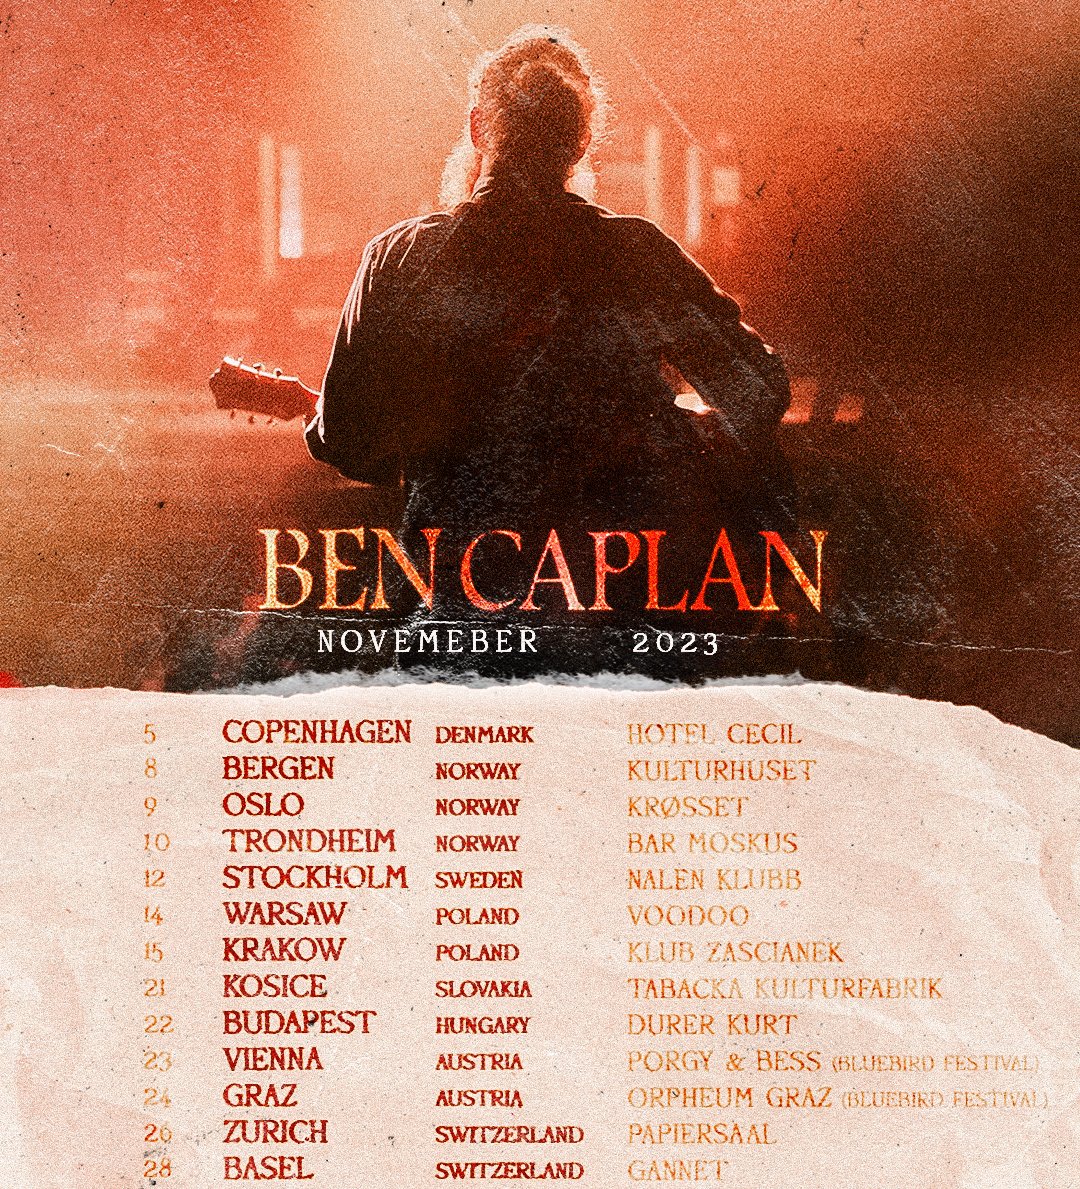 It's a busy November! The tour has begun! On my way to Denmark now. Will I see you at one of the shows? Tickets and stuff at bencaplan.ca/tour